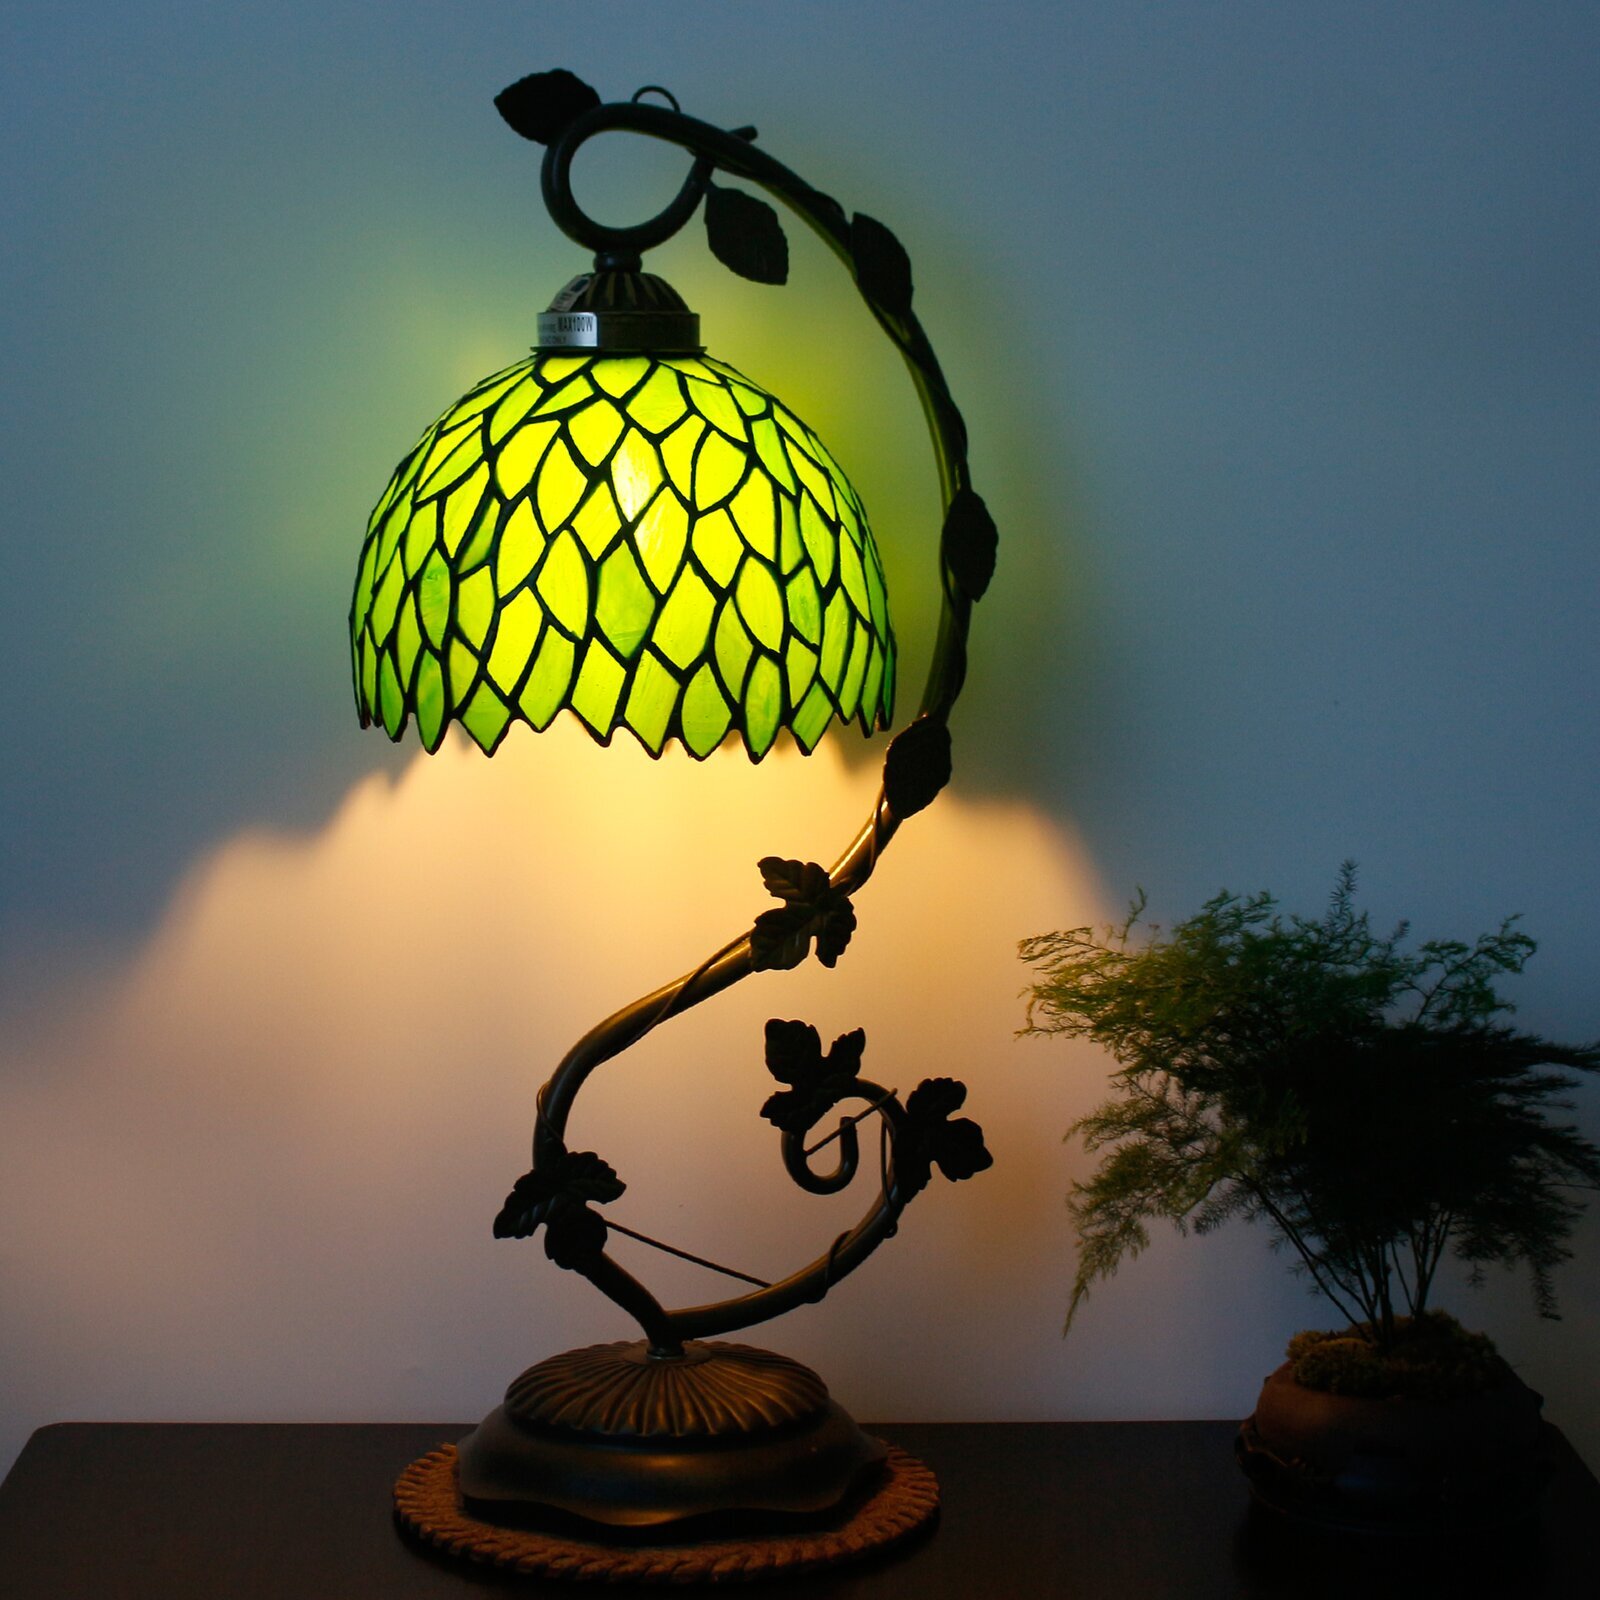 Tiffany Lamp Stained Glass Table Reading Banker Night Light Green Wisteria Style W8H20 Inch S523 World Menagerie LAMPS Living Room Bedroom Office Study Coffee Bar Dresser Bookcase Desk Bedside Crafts Gift